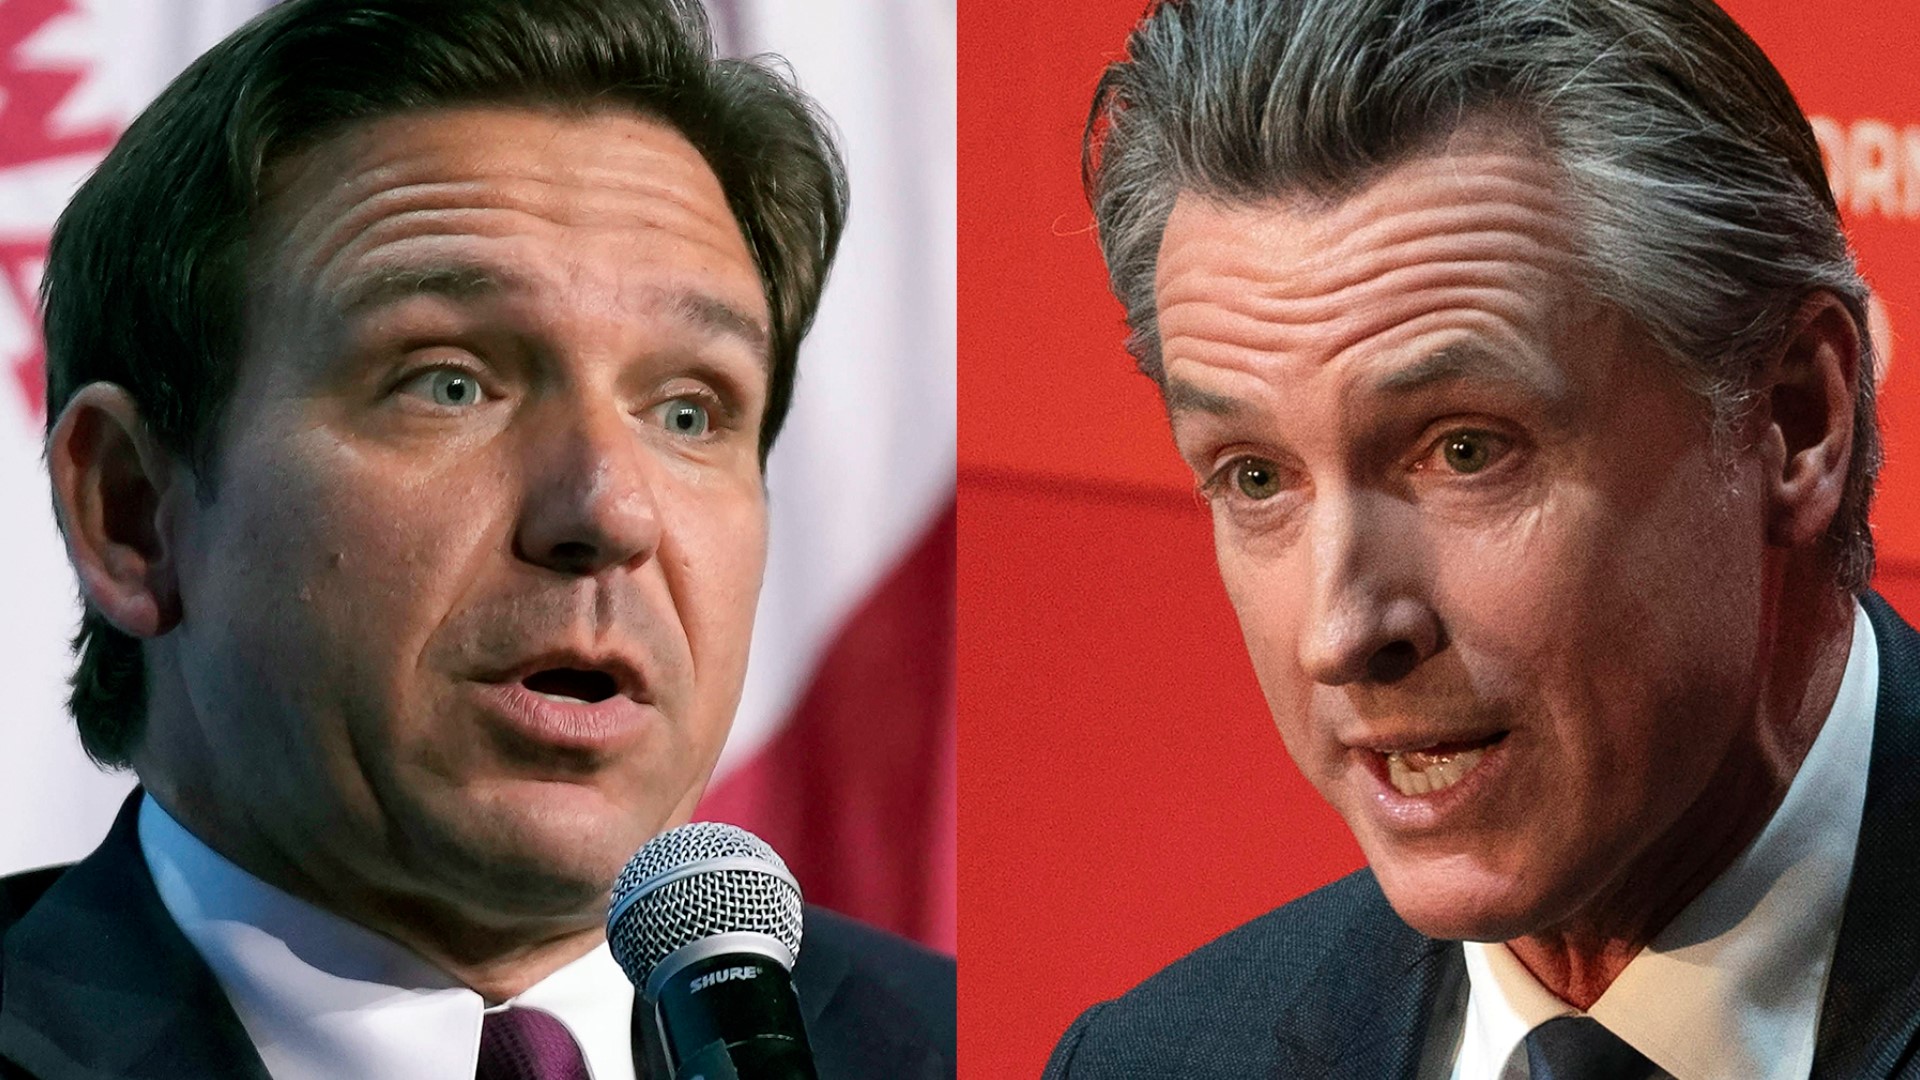 California Governor Gavin Newsom and Florida Governor Ron DeSantis lobbed insults and, at times, talked policy during their televised faceoff in Georgia.